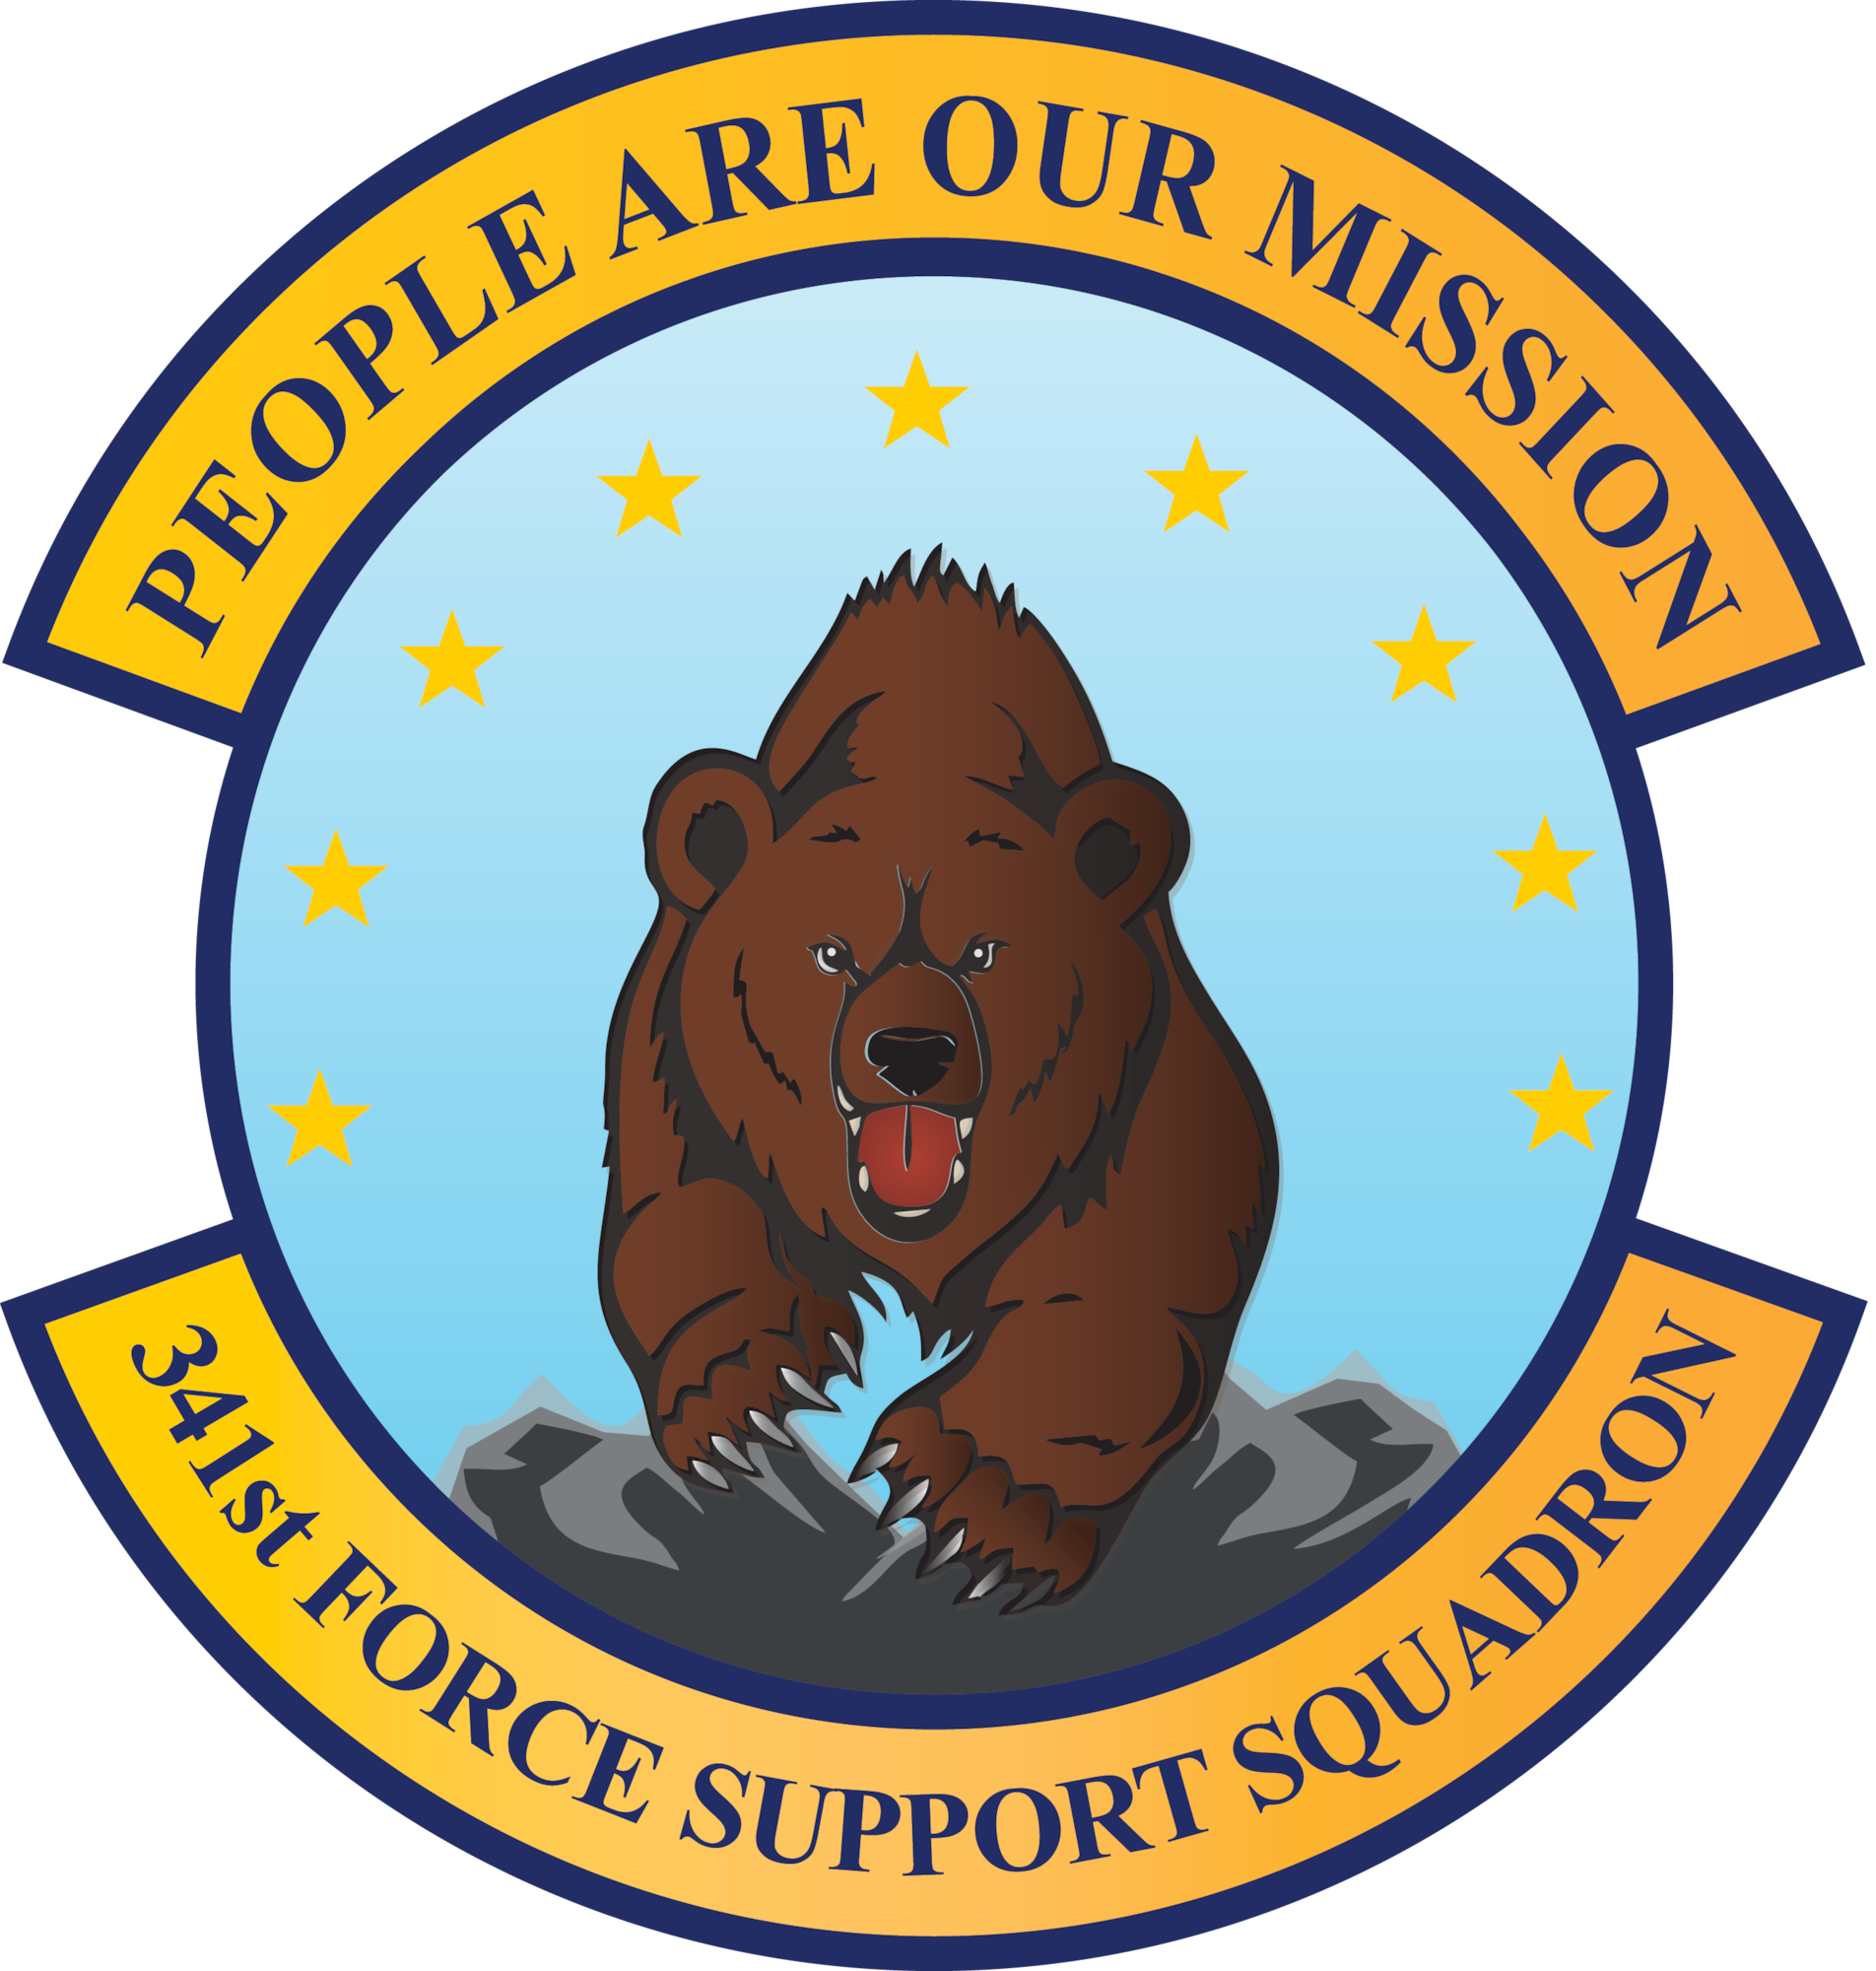 Squadron shield for the 341st Force Support Squadron.